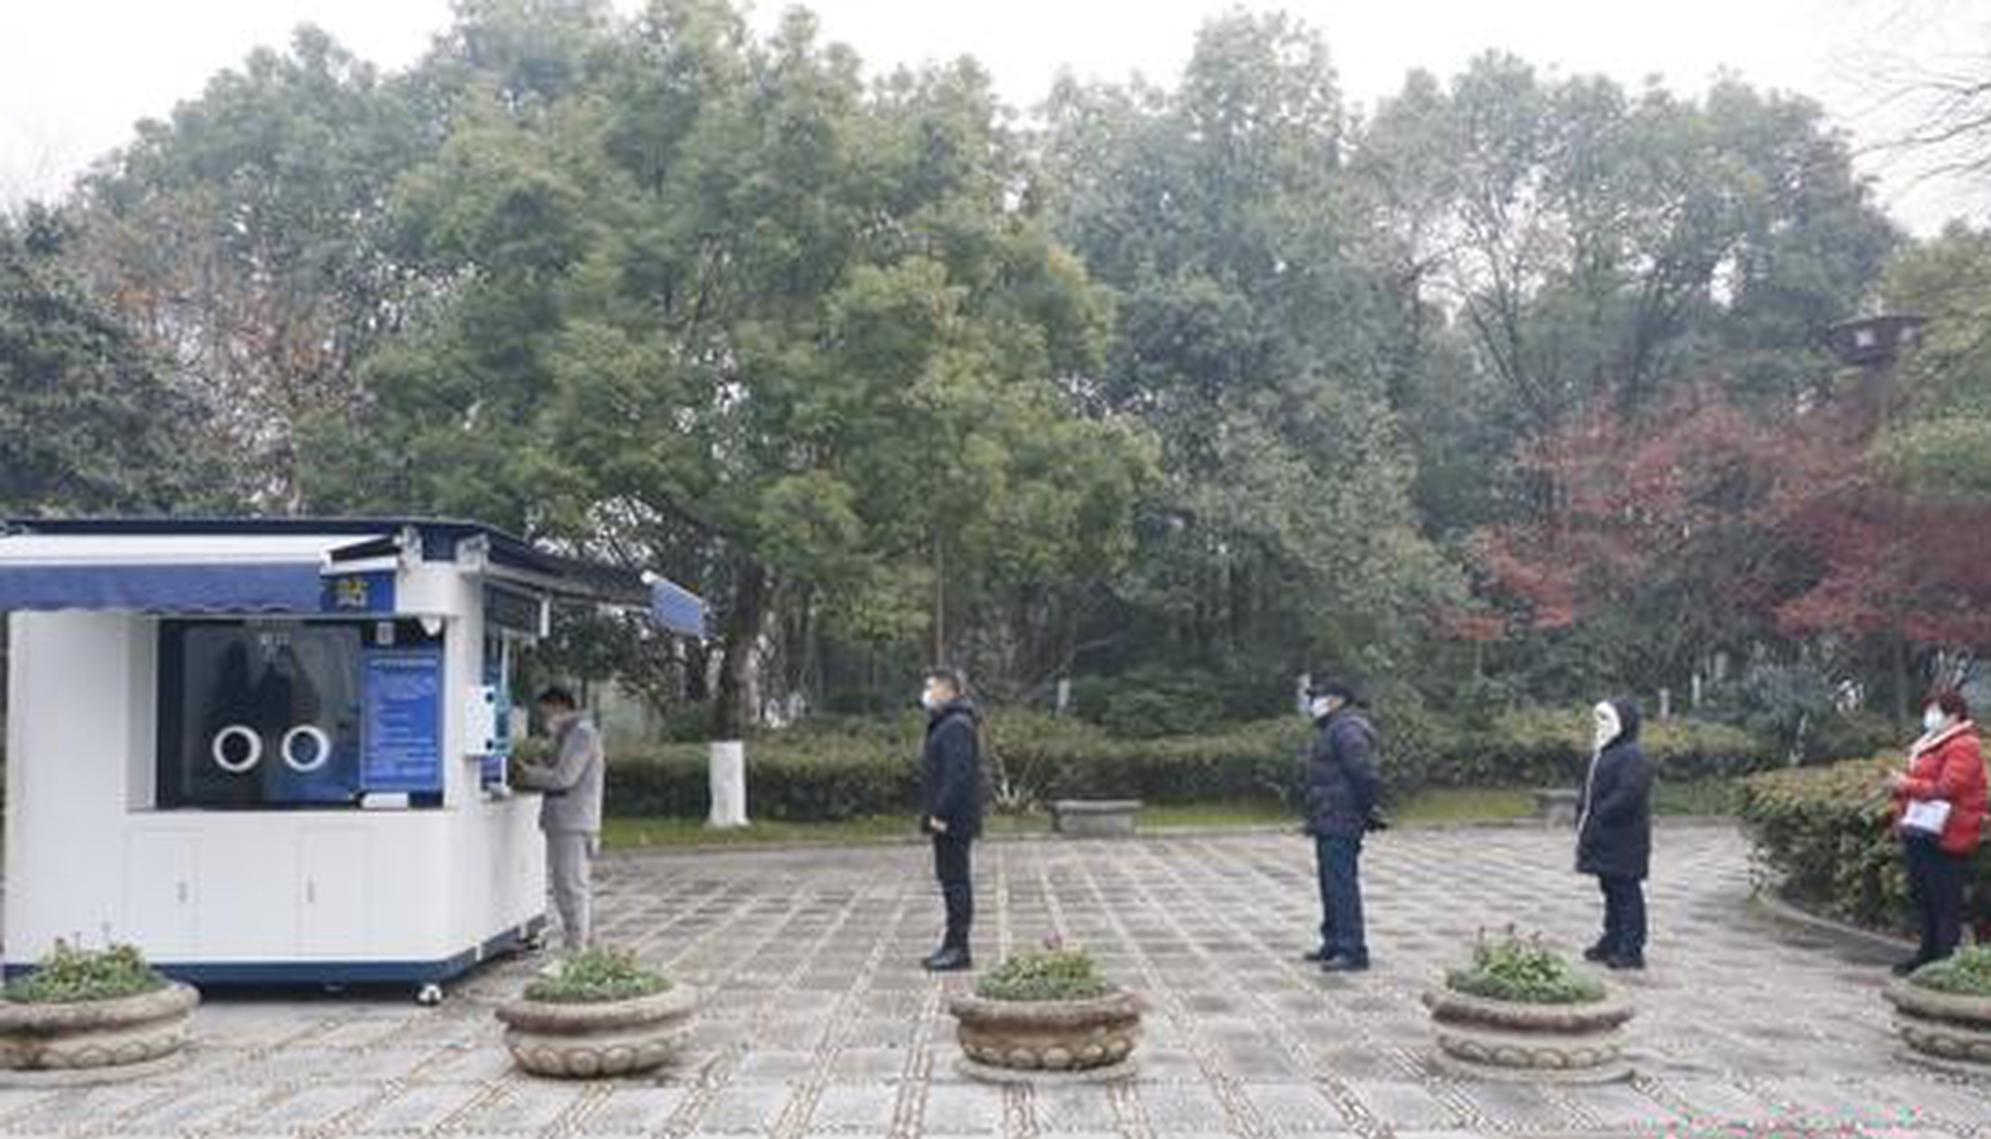 Outdoor medical service stations set up for COVID patients in Zhejiang 